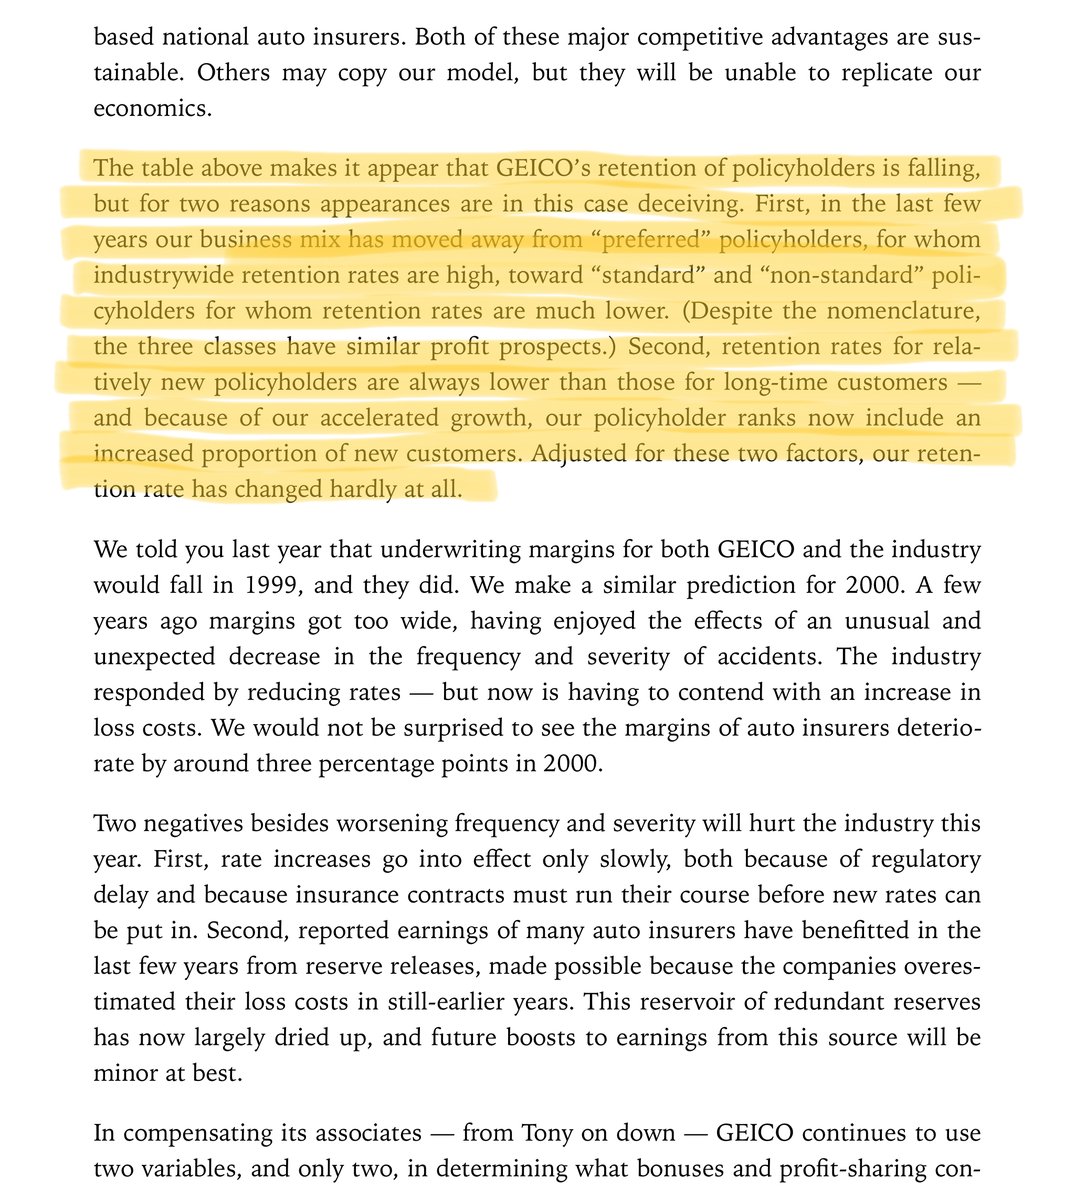 26/I'll leave you with some references containing more insights on LTV and CAC.LTV and CAC may seem like newfangled terms, but Buffett was talking about this trade-off way back in 1999! https://www.berkshirehathaway.com/letters/1999htm.html